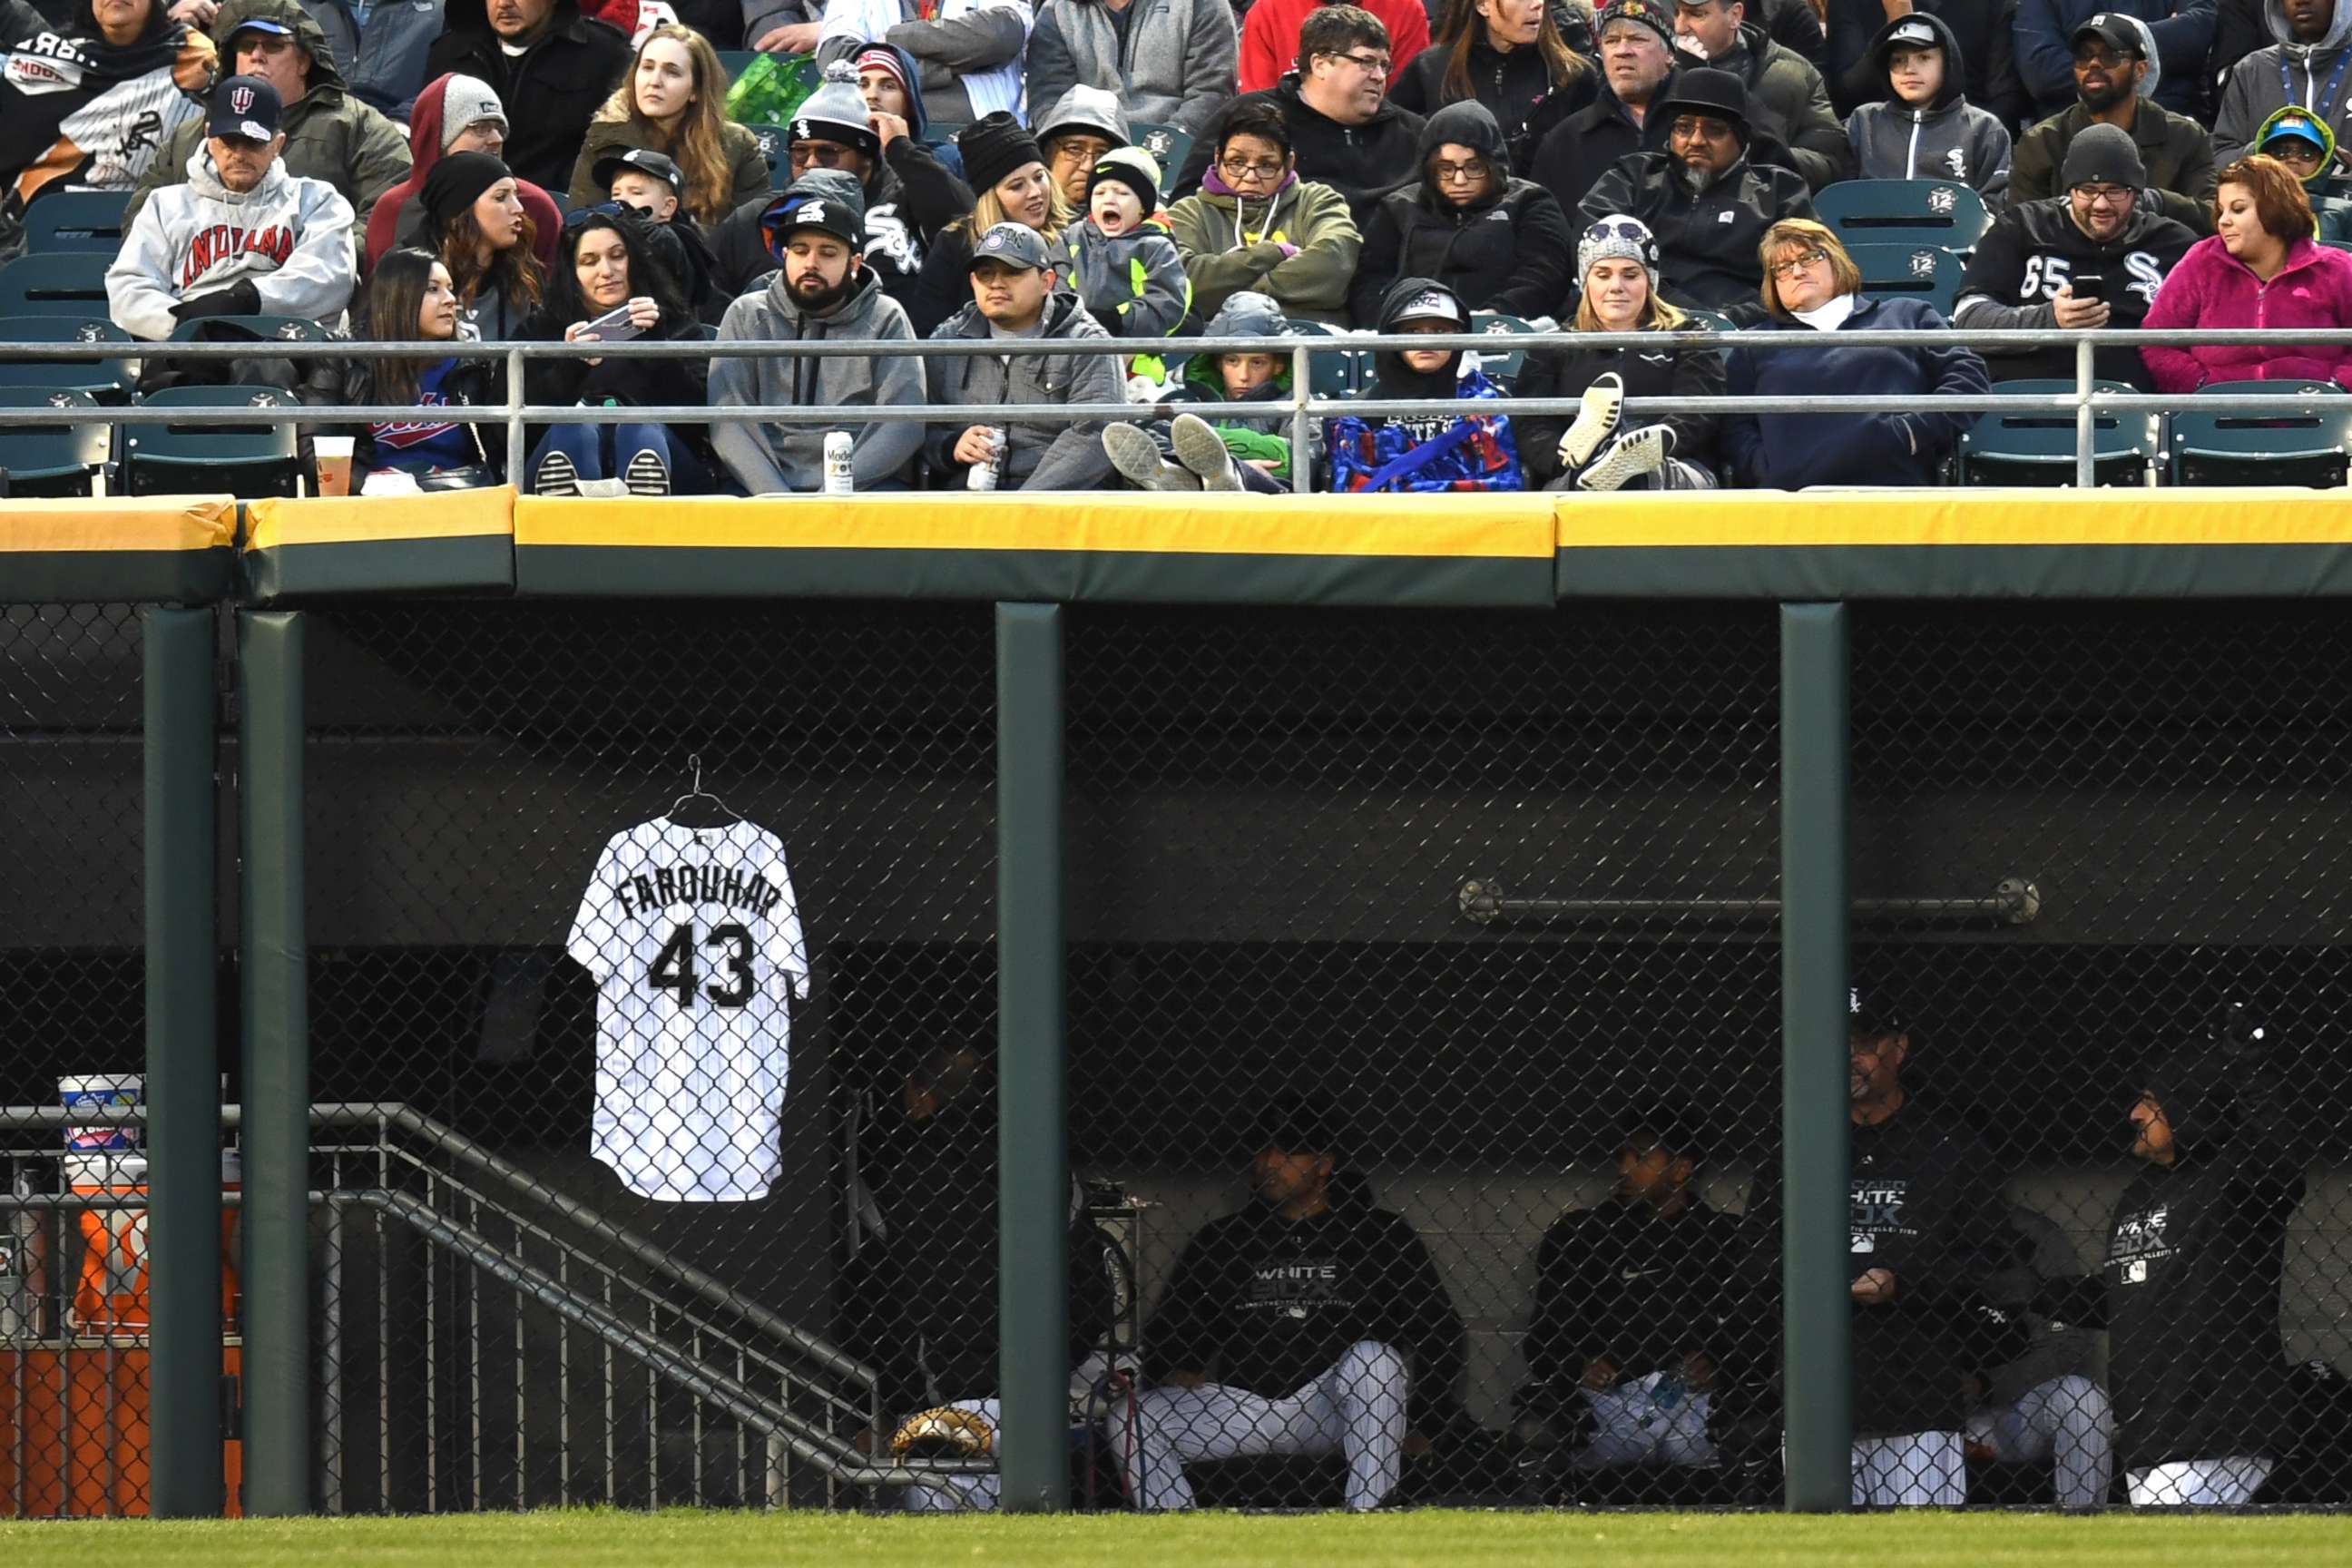 PHOTO: Chicago White Sox relief pitcher Danny Farquhar's jersey is seen hanging in the outfield dugout during a game between the and the Houston Astros the Chicago White Sox on April 21, 2018, at Guaranteed Rate Field, in Chicago, IL.